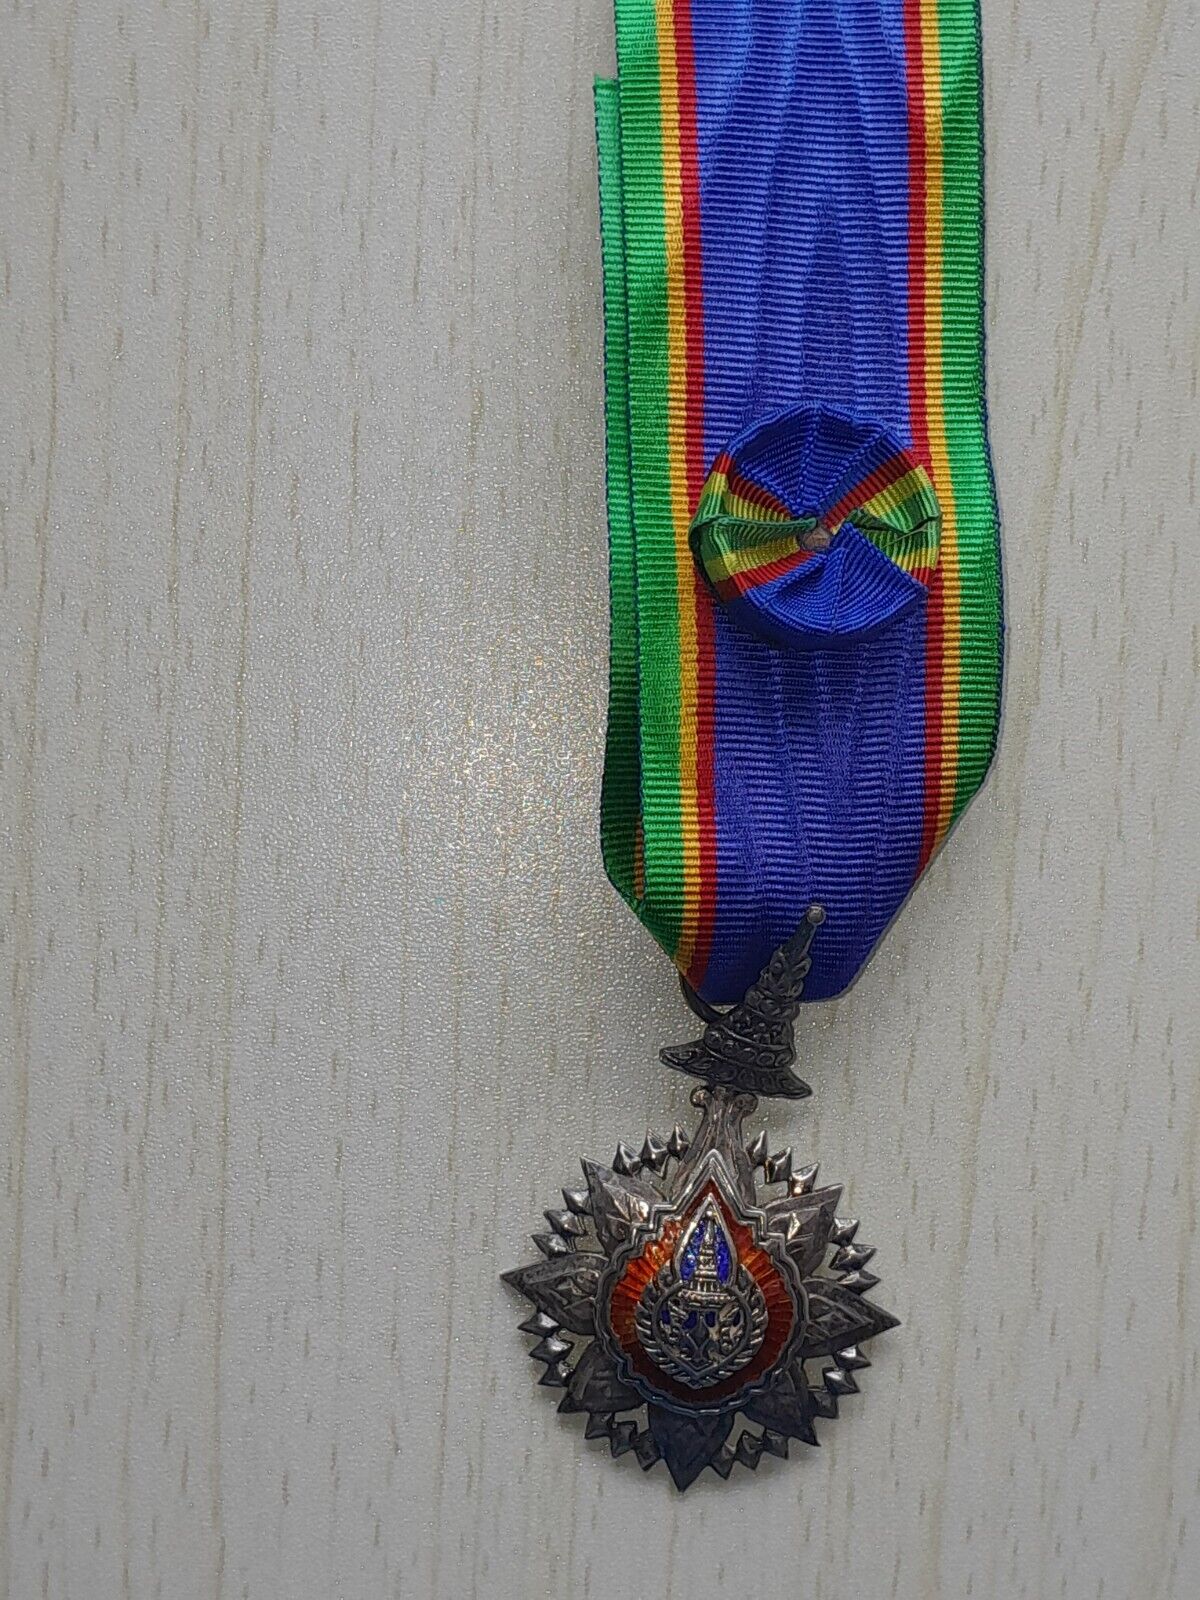 THAILAND ORDER OF THE CROWN OF THAILAND-4TH CLASS.